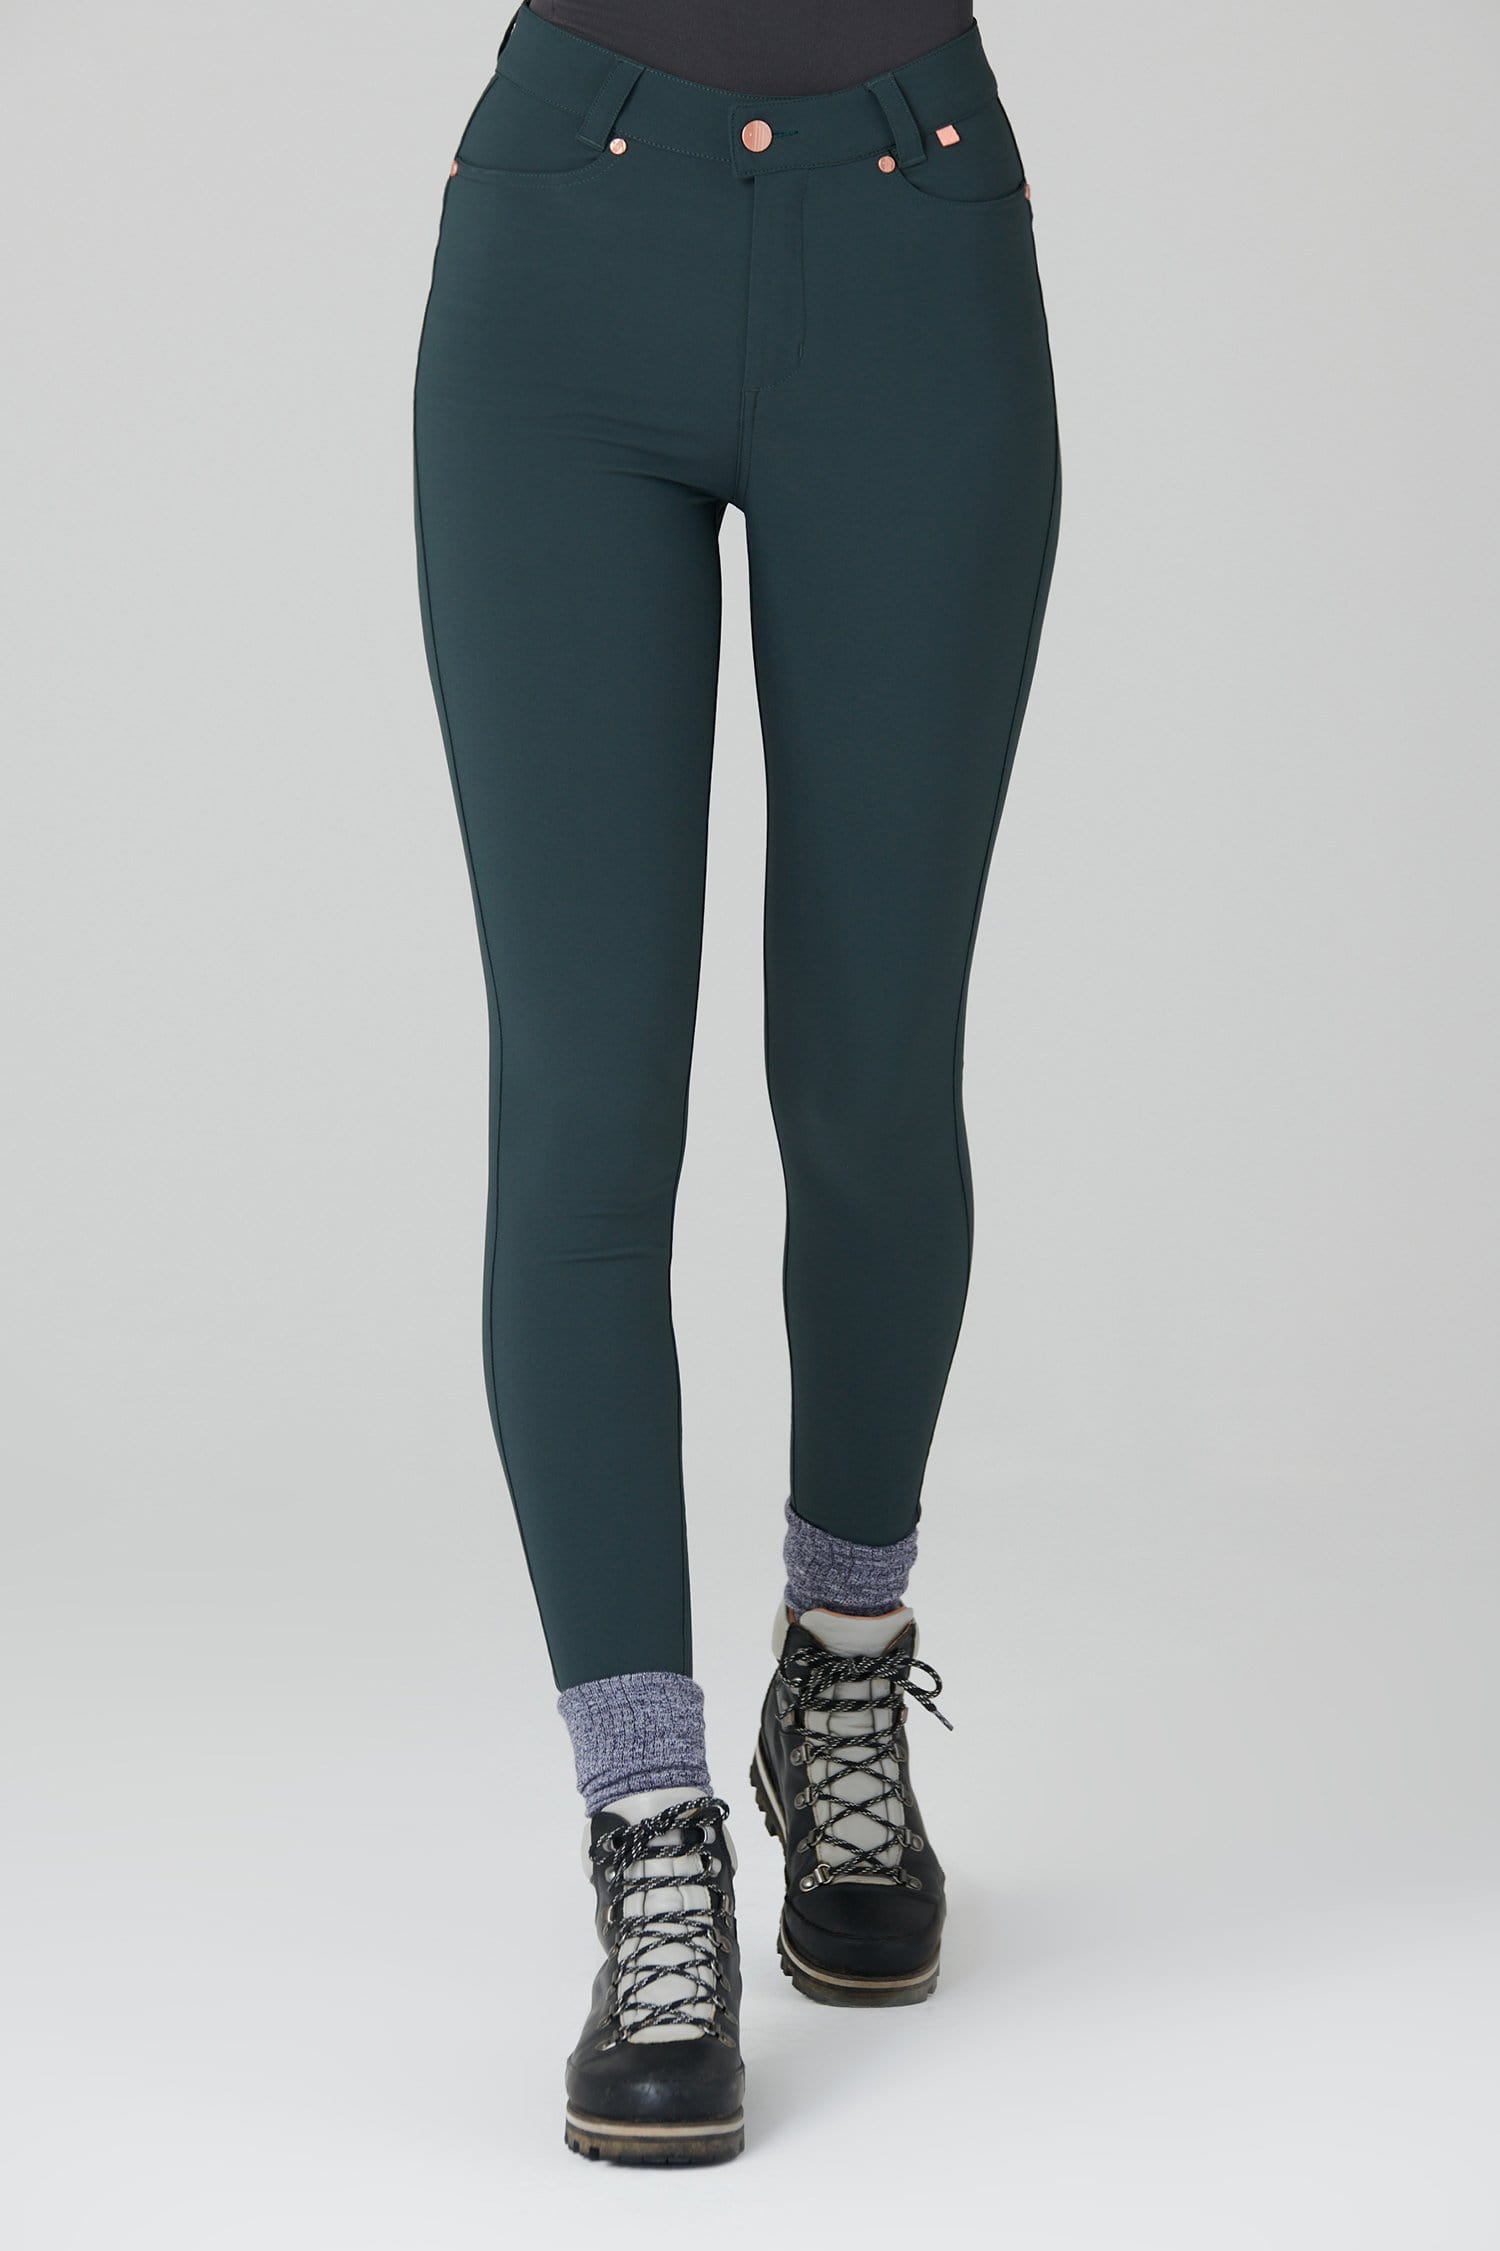 Thermal Skinny Outdoor Trousers - Forest Green - 34r / Uk16 - Womens - Acai Outdoorwear